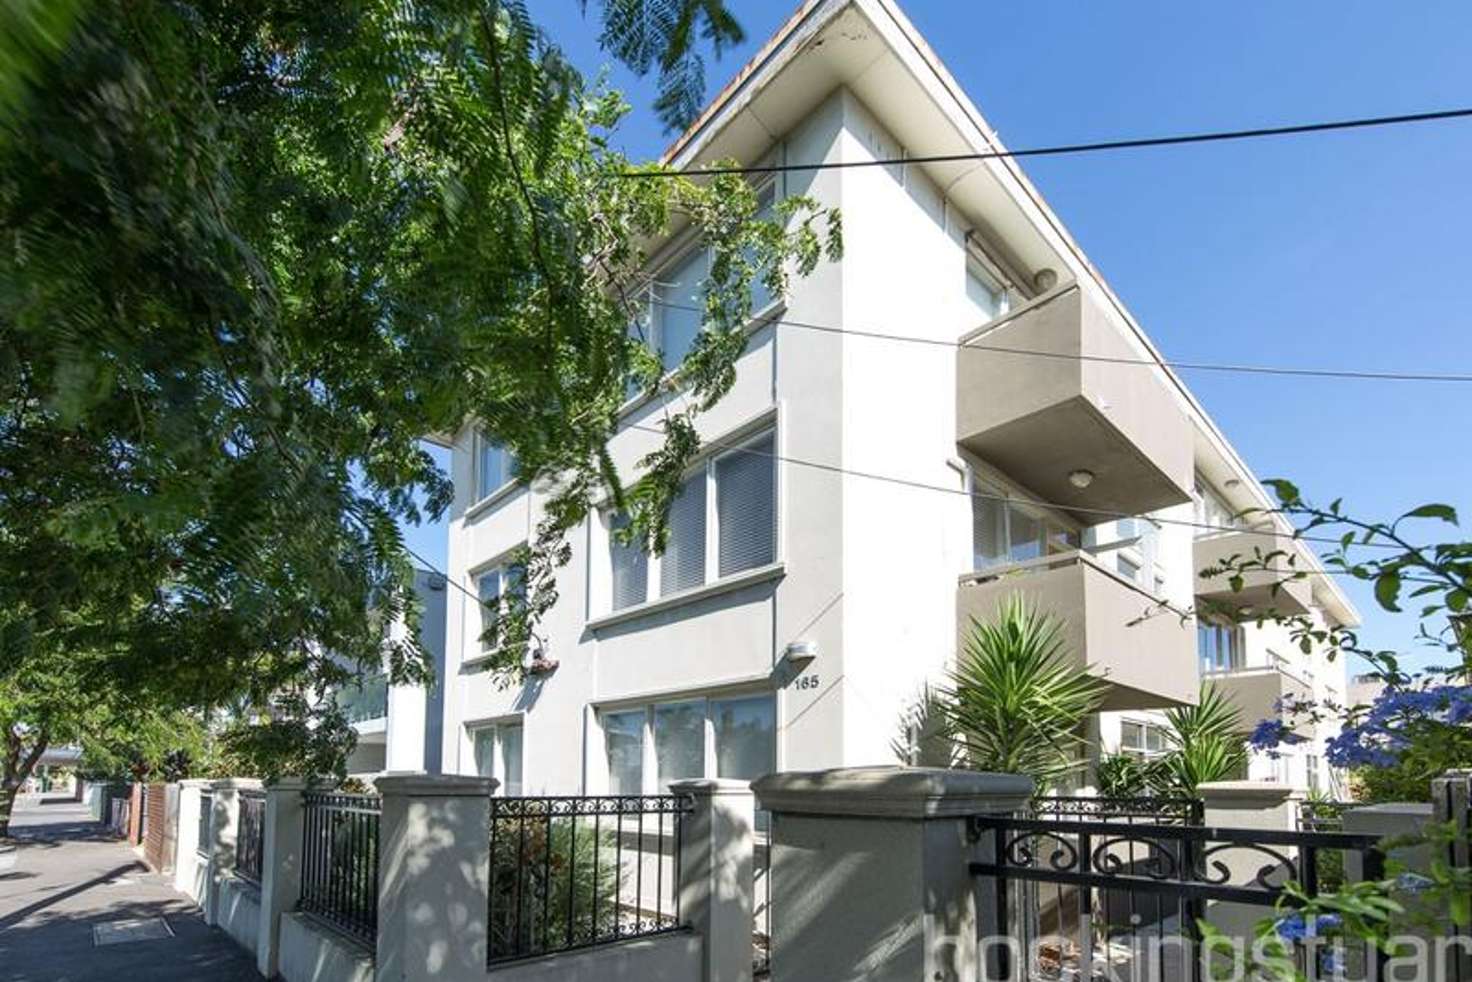 Main view of Homely apartment listing, 8/165 Stokes Street, Port Melbourne VIC 3207